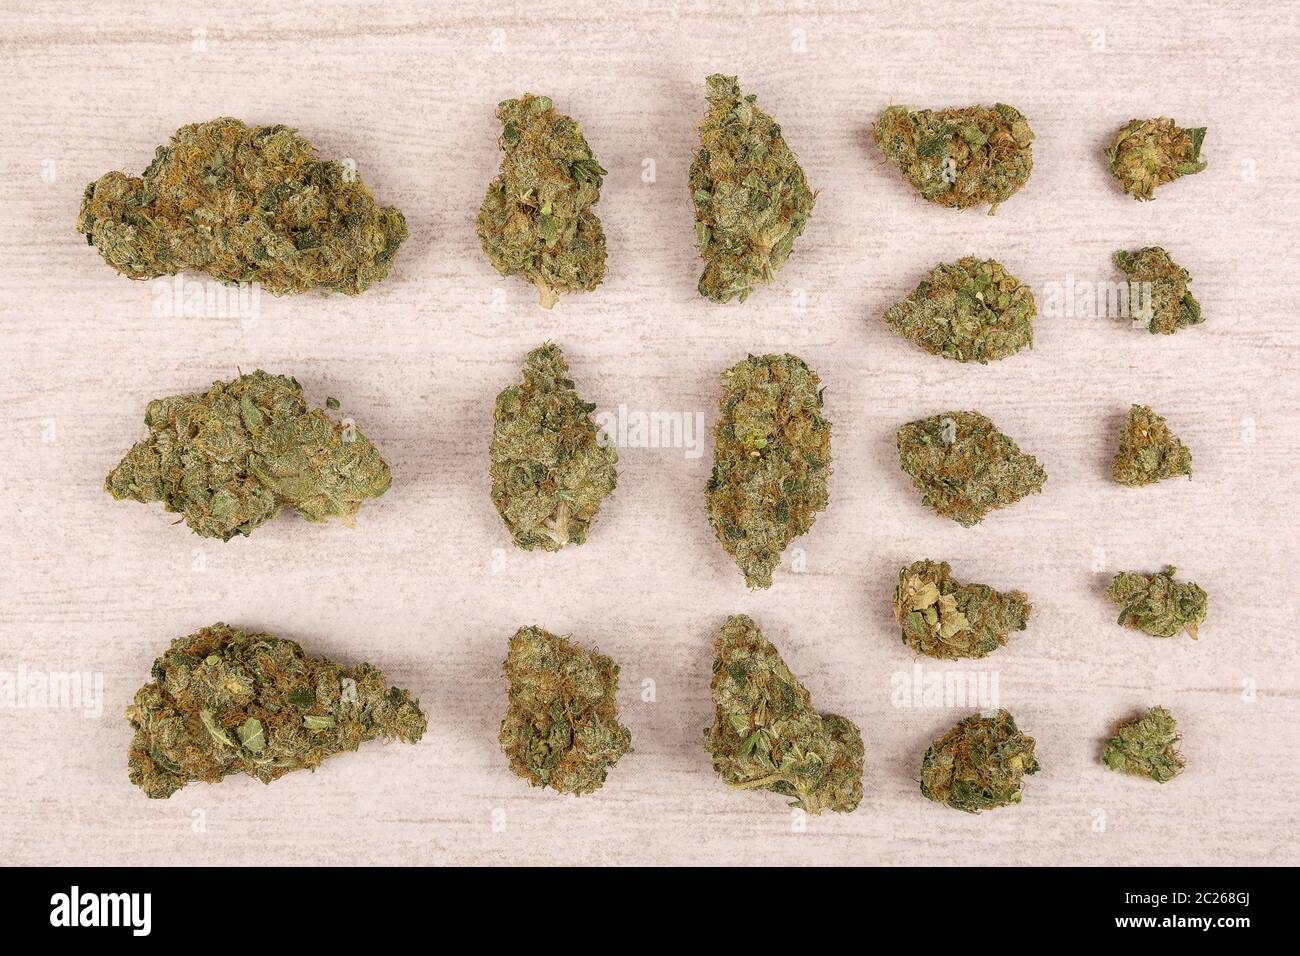 Cannabis buds from above. Stock Photo